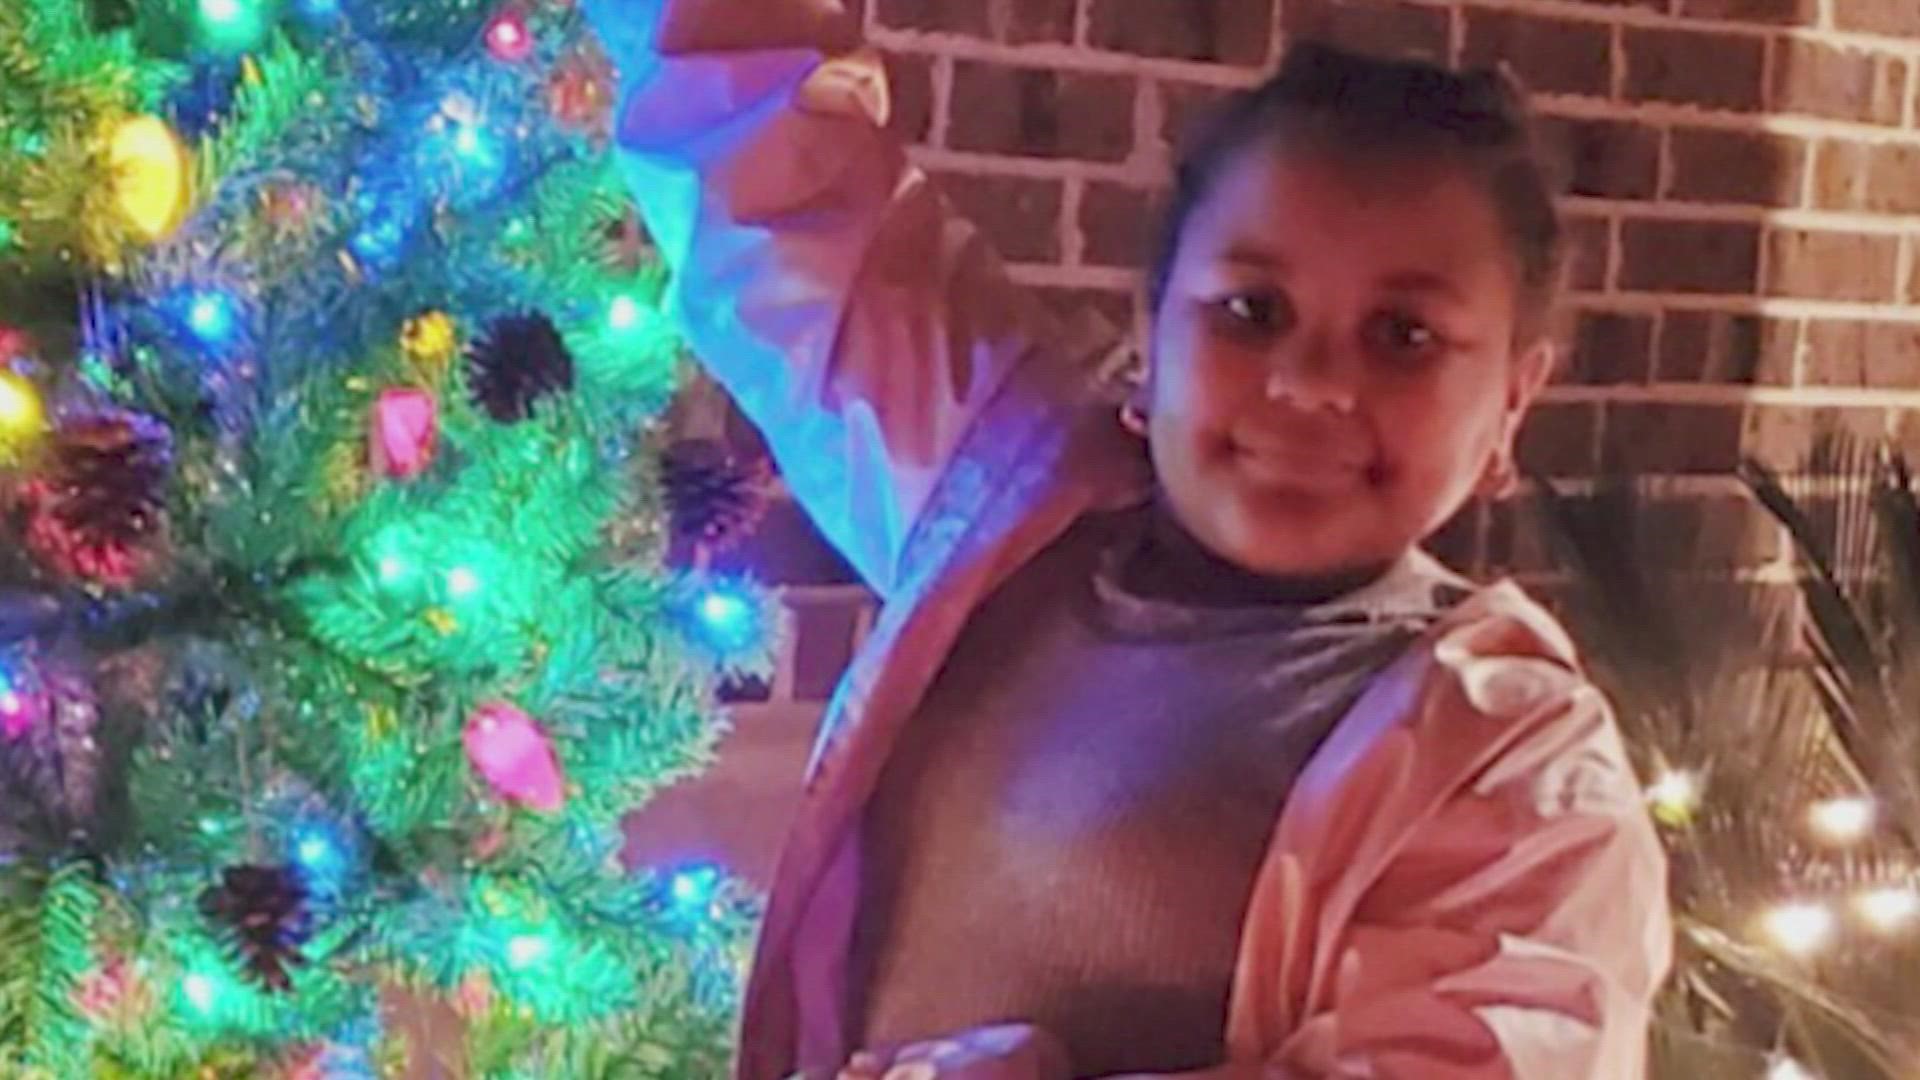 Houston police say Ashanti Grant, a 9-year old girl, was shot in the head while riding in her family’s SUV Tuesday night.